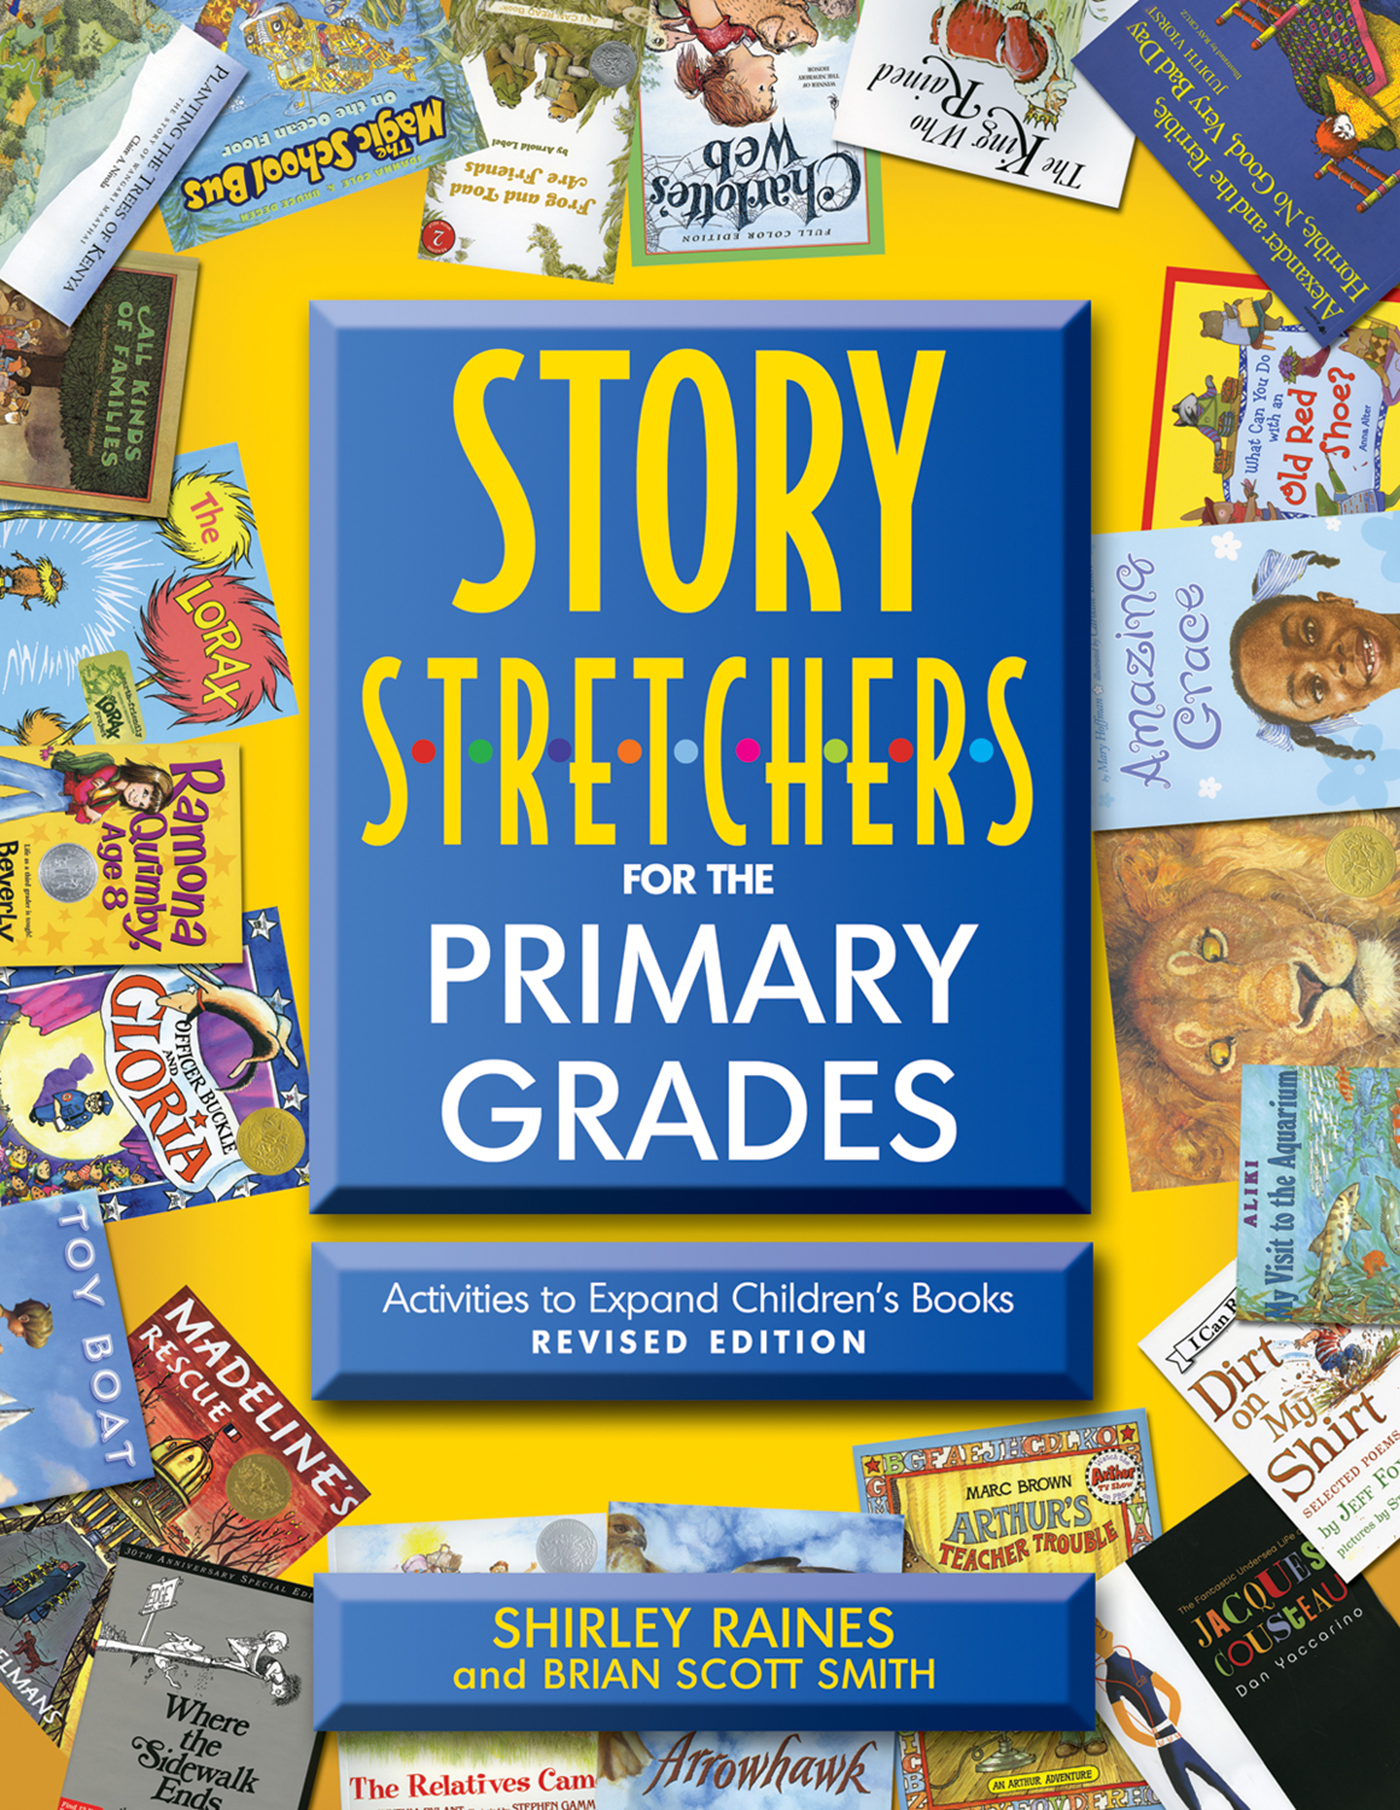 story_s_t_r_e_t_c_h_e_r_s_for_the_primary_grades-cover